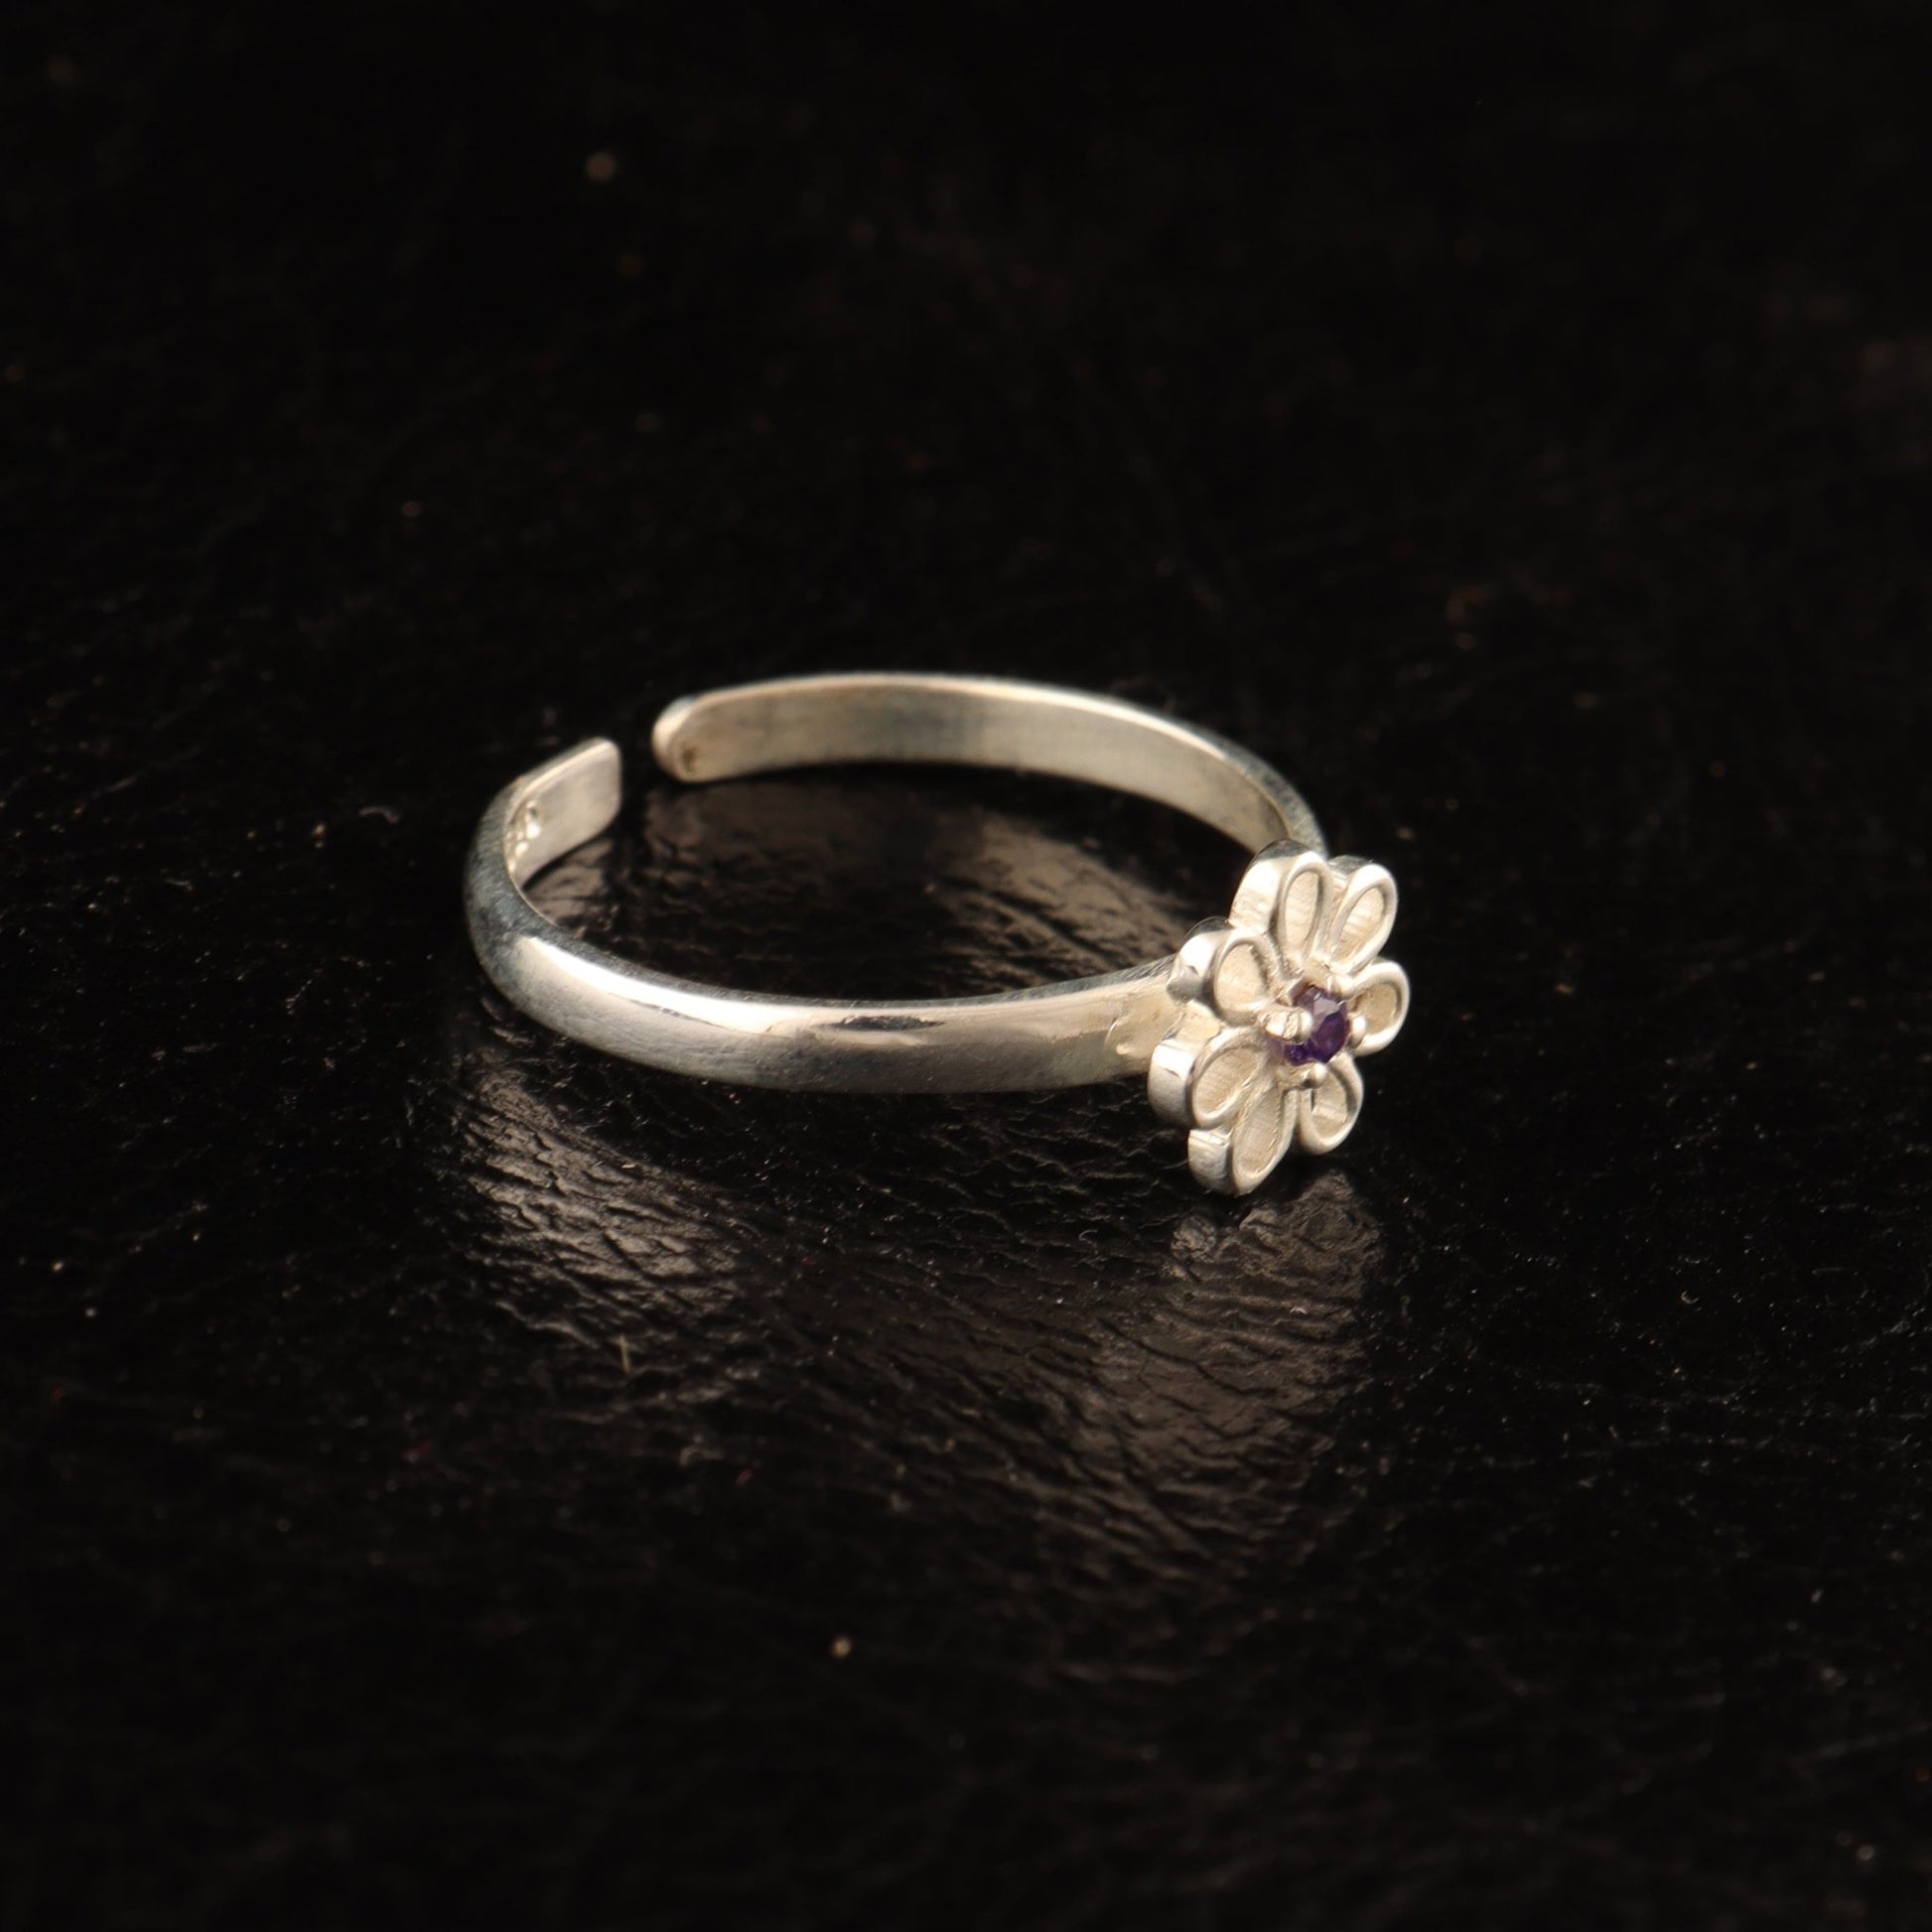 Adjustable Silver Daisy Ring with Gem - SBJ